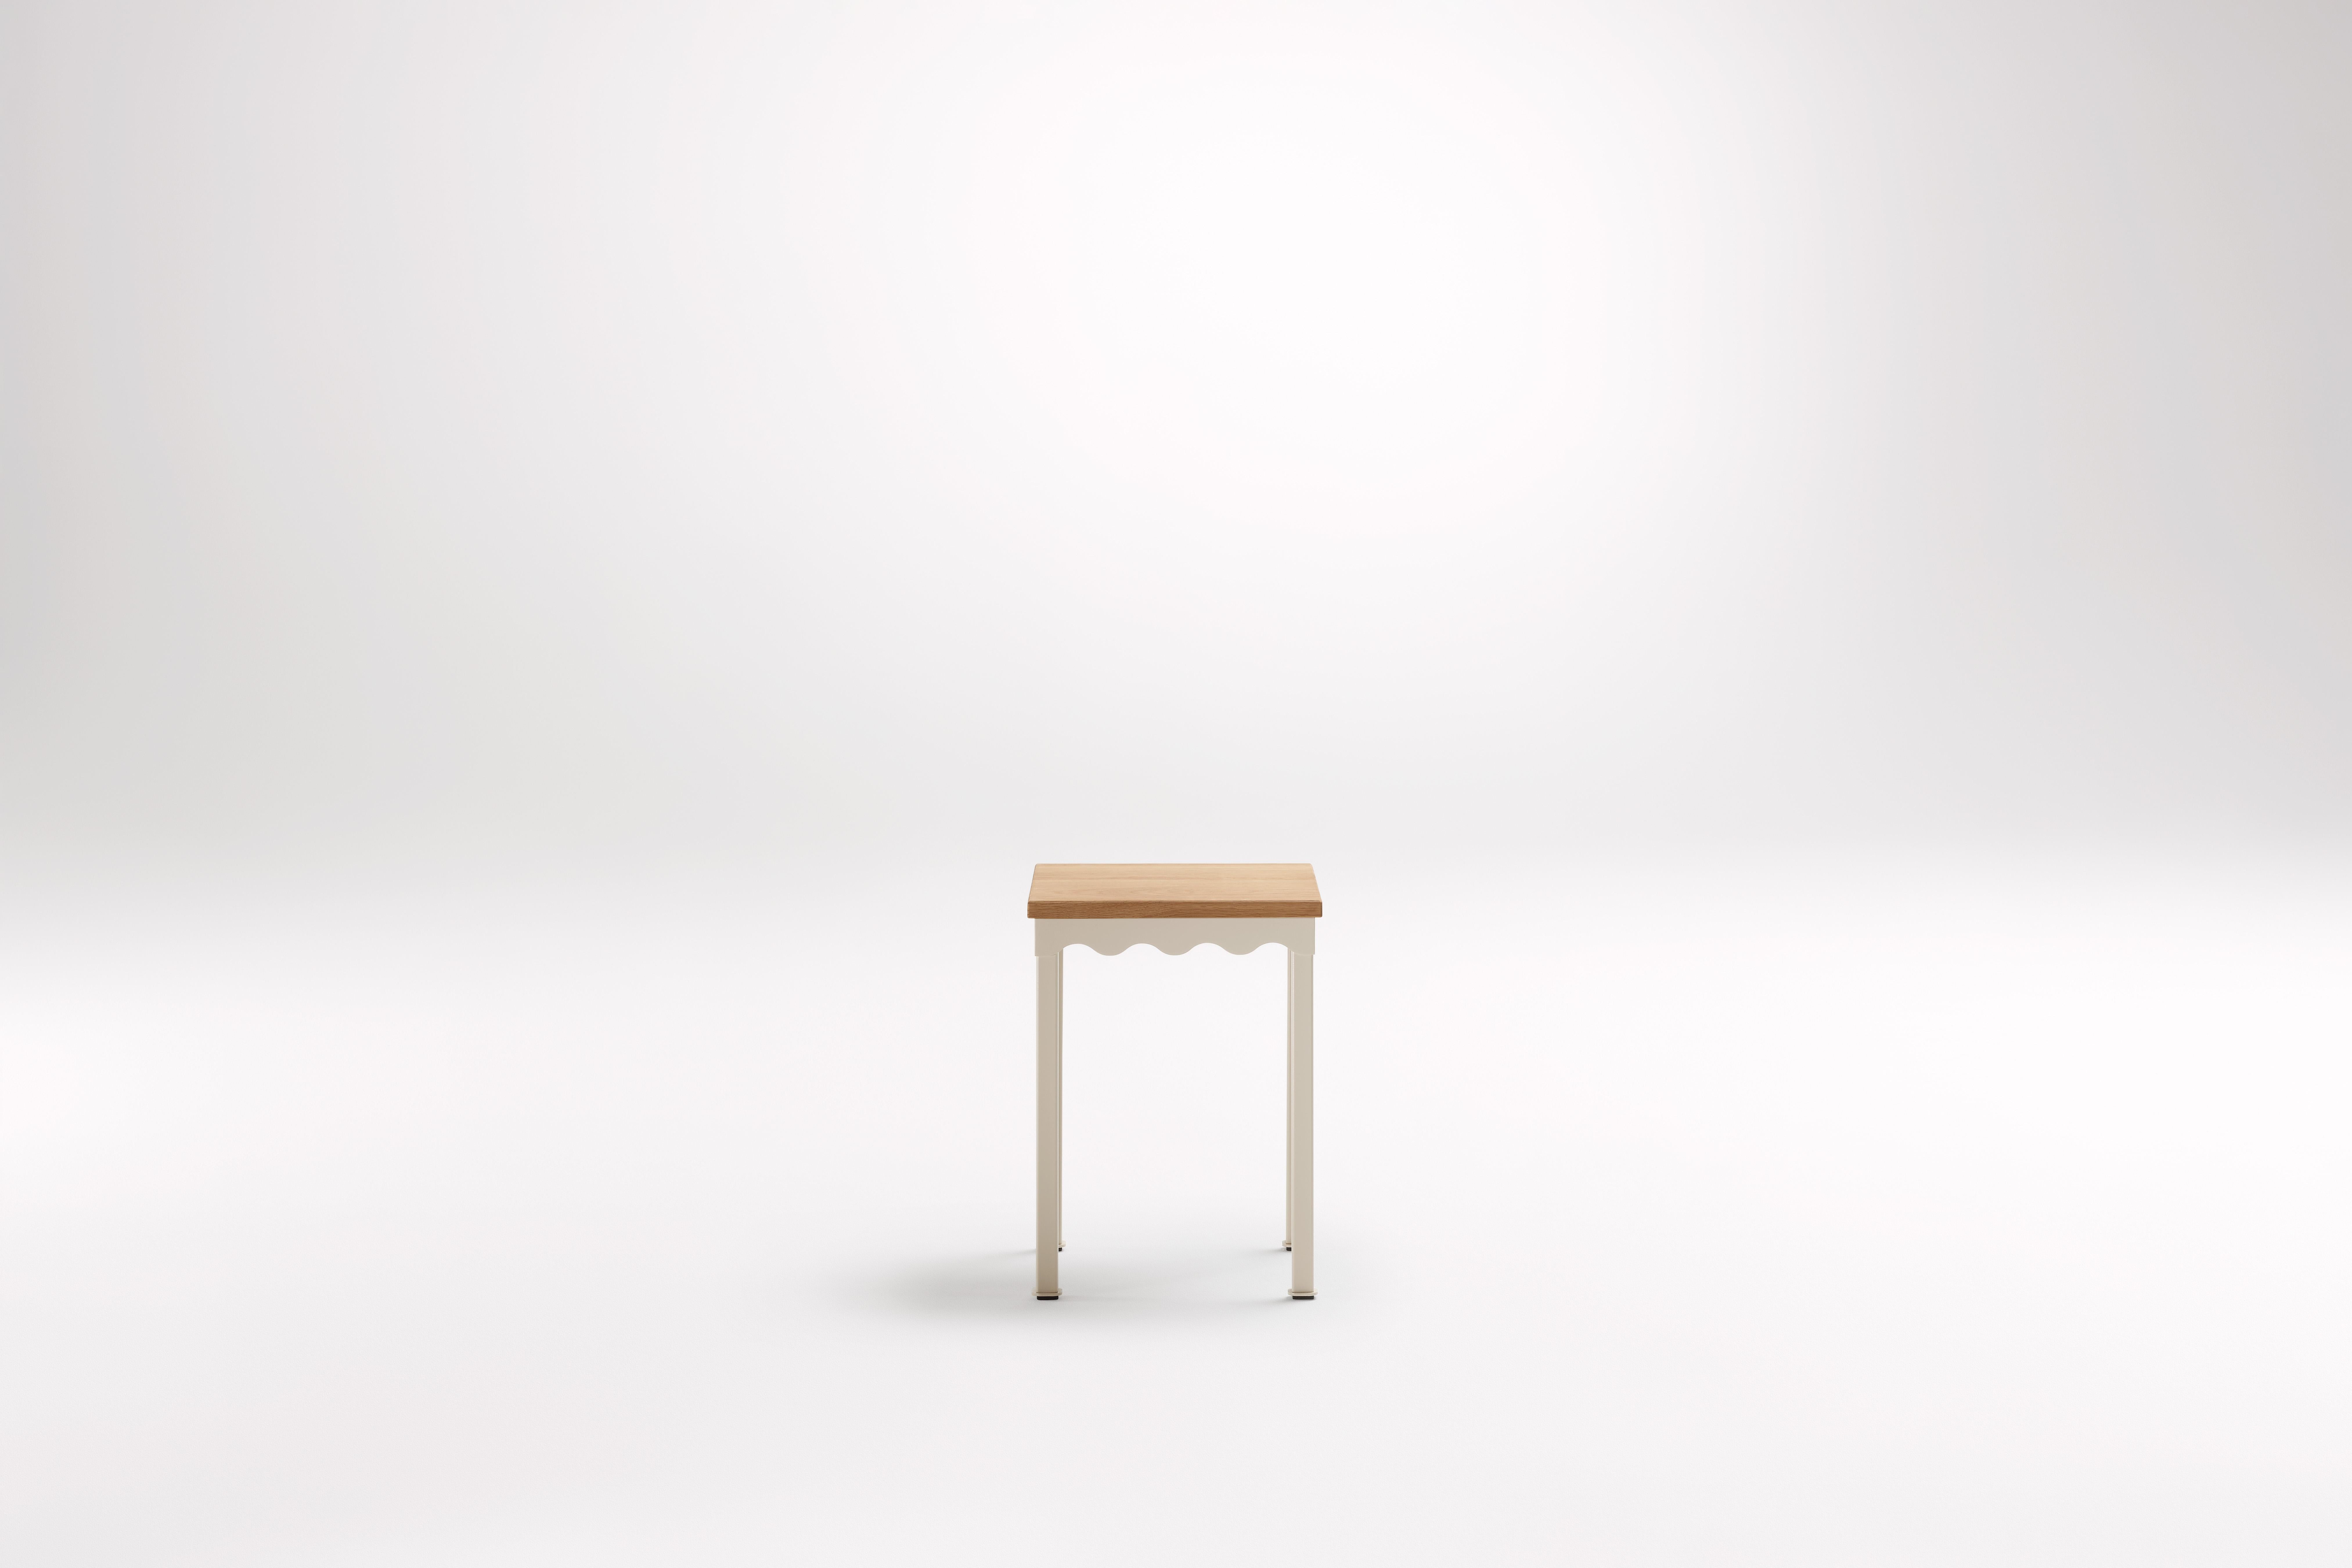 American Oak Bellini Low Stool by Coco Flip
Dimensions: D 34 x W 34 x H 45 cm
Materials: Timber / Stone tops, Powder-coated steel frame. 
Weight: 5 kg
Timber Tops :American Oak.
Frame Finishes: Textura Paperbark.

Coco Flip is a Melbourne based